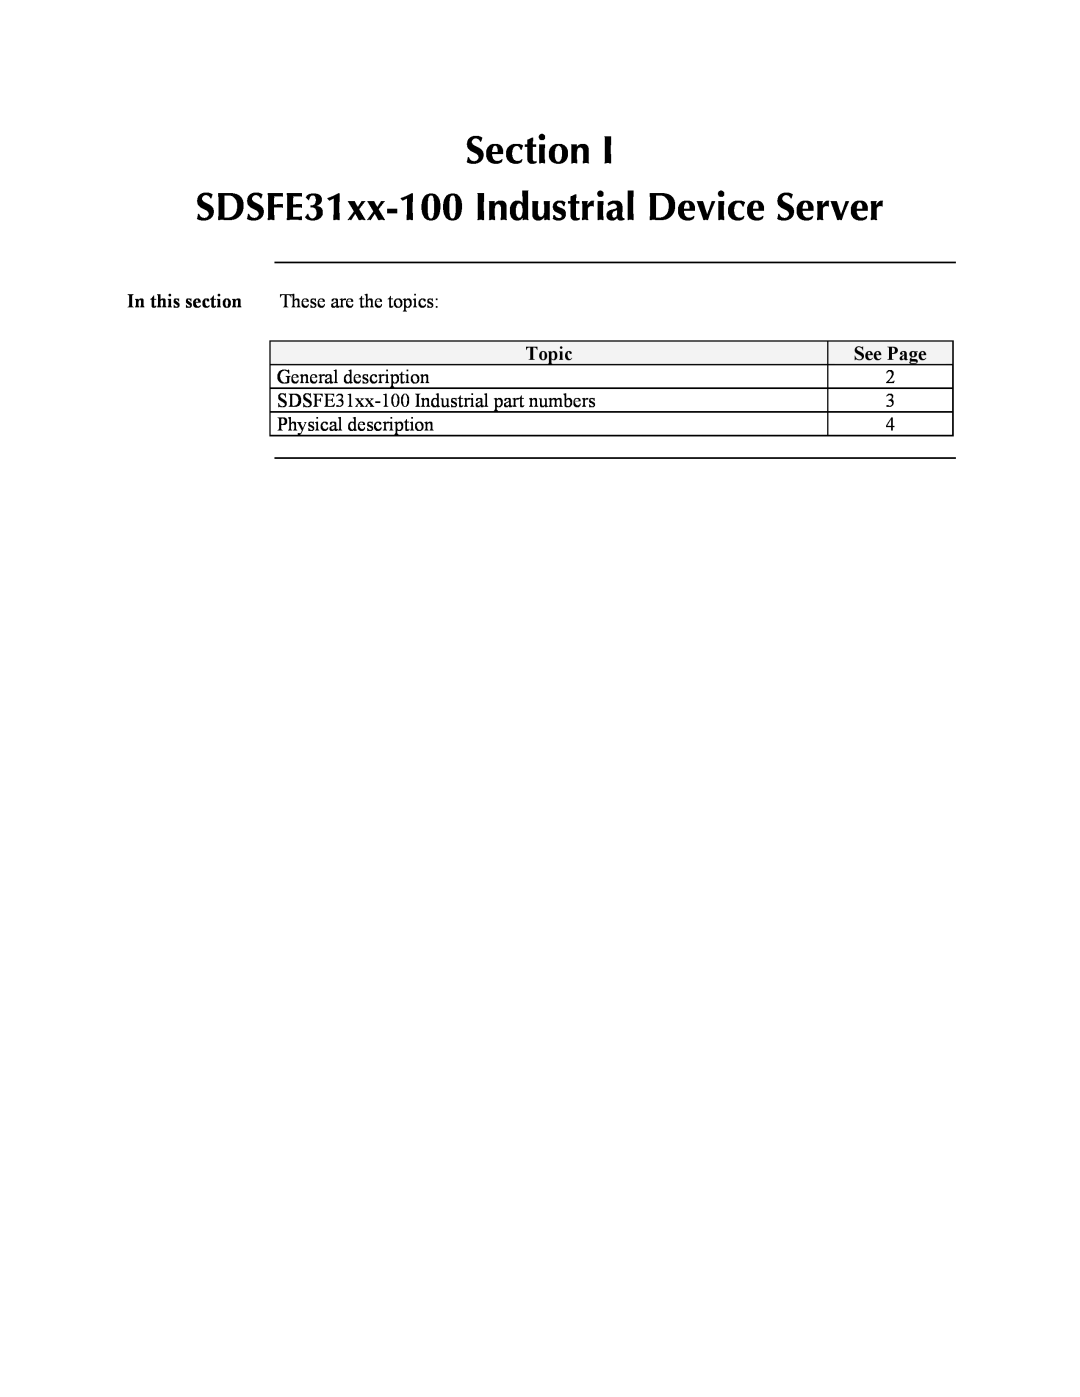 Transition Networks SDSFE31XX-100, RS-232-TO-100BASE-FX Section SDSFE31xx-100Industrial Device Server, Topic, See Page 